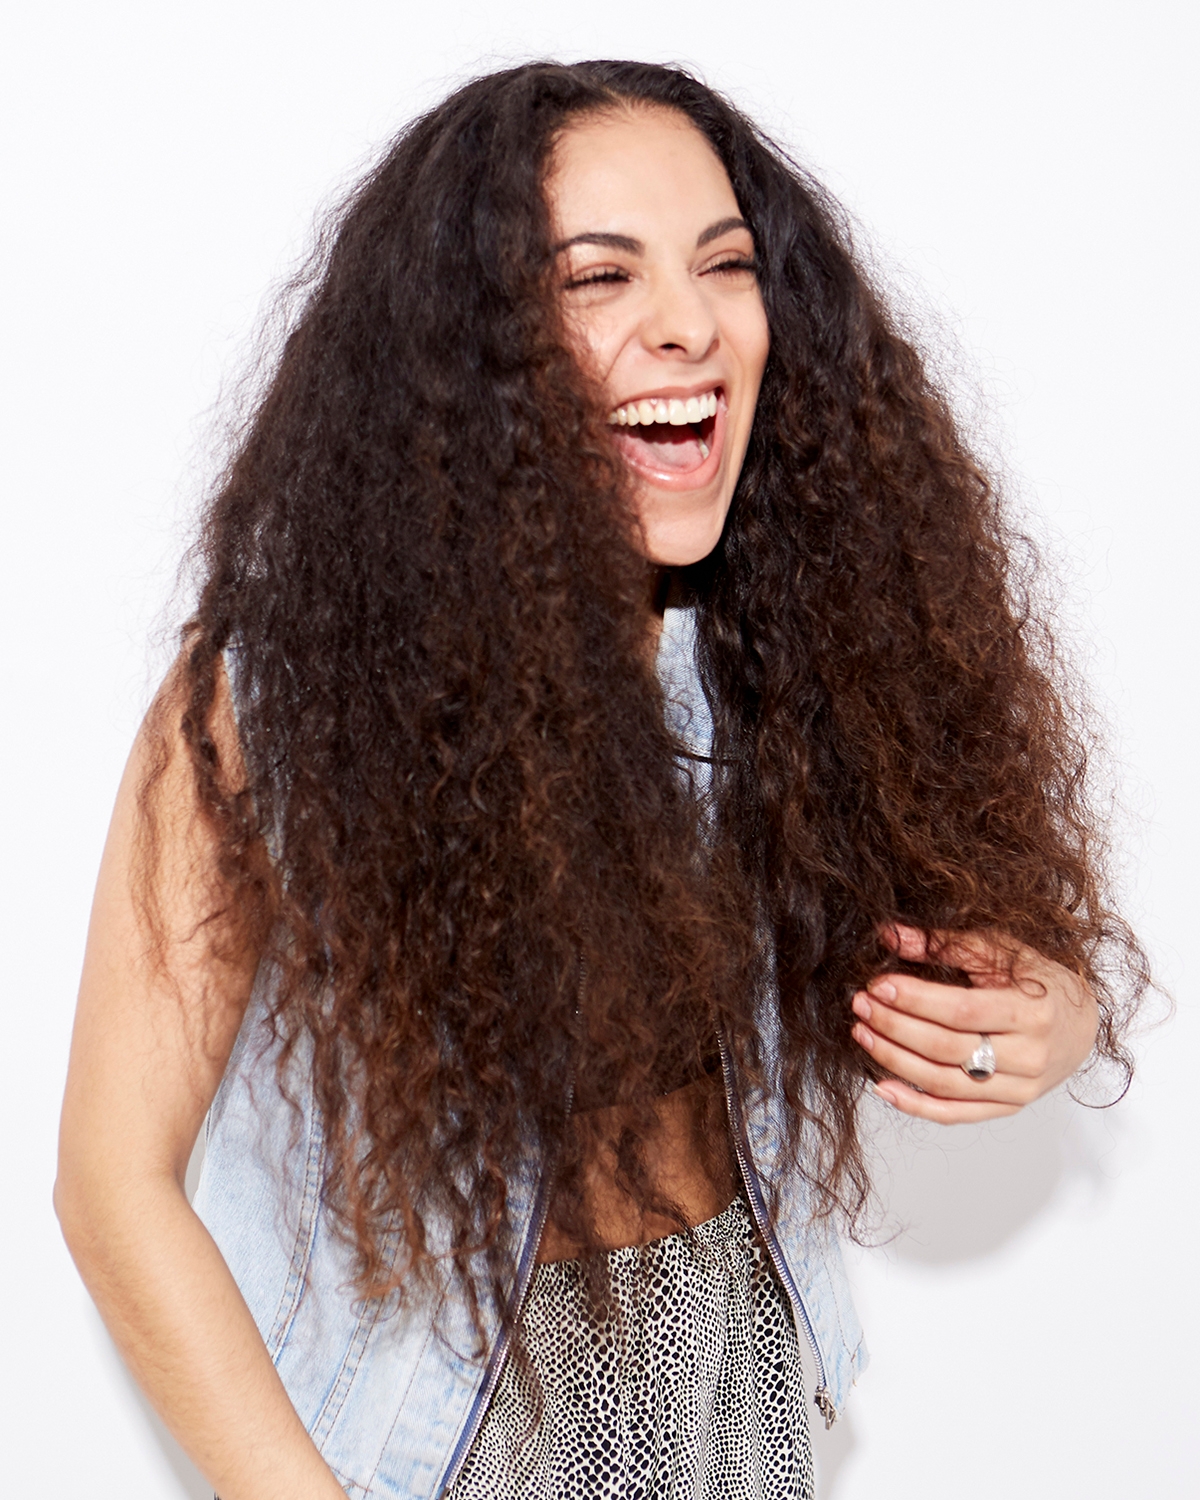 How to Take Care of Long Hair | Tips on Keeping Long Hair Healthy